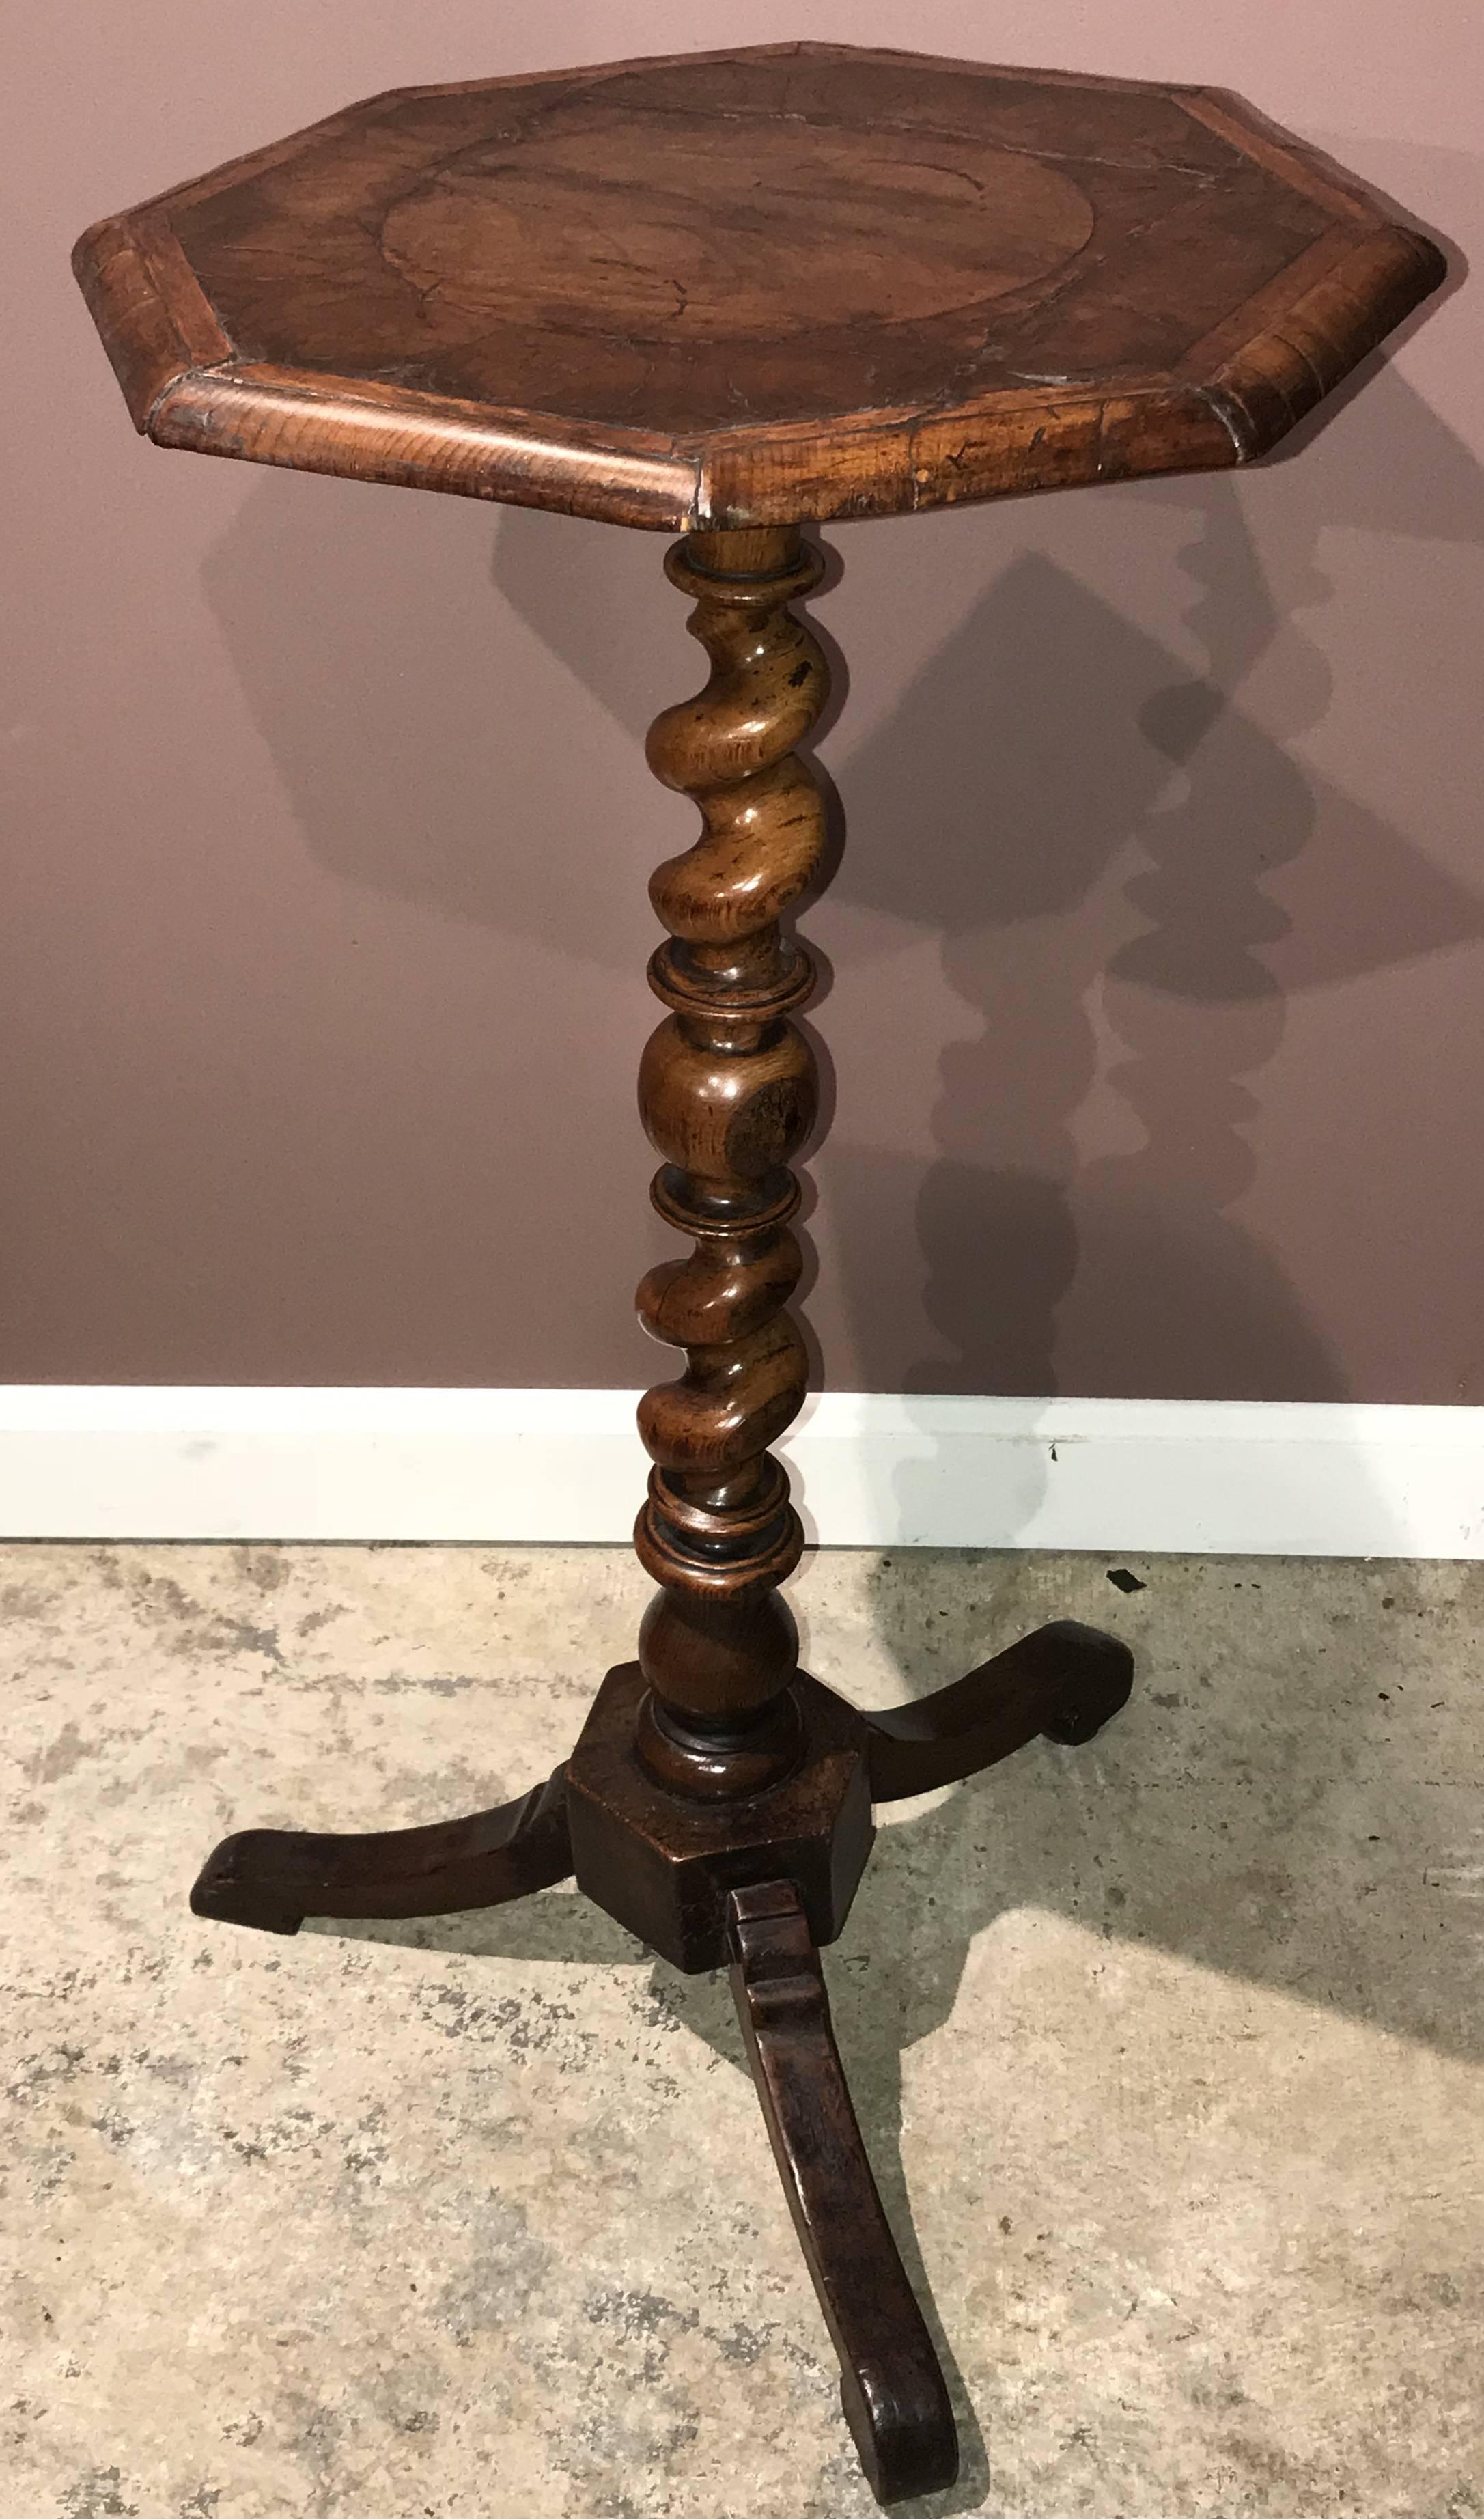 A fine example of an English walnut candle stand or side table with octagonal top with circular and banded marquetry, probably inlaid with crocus and olive wood, surmounting a rope twist carved stem, all supported by a square tripod base with